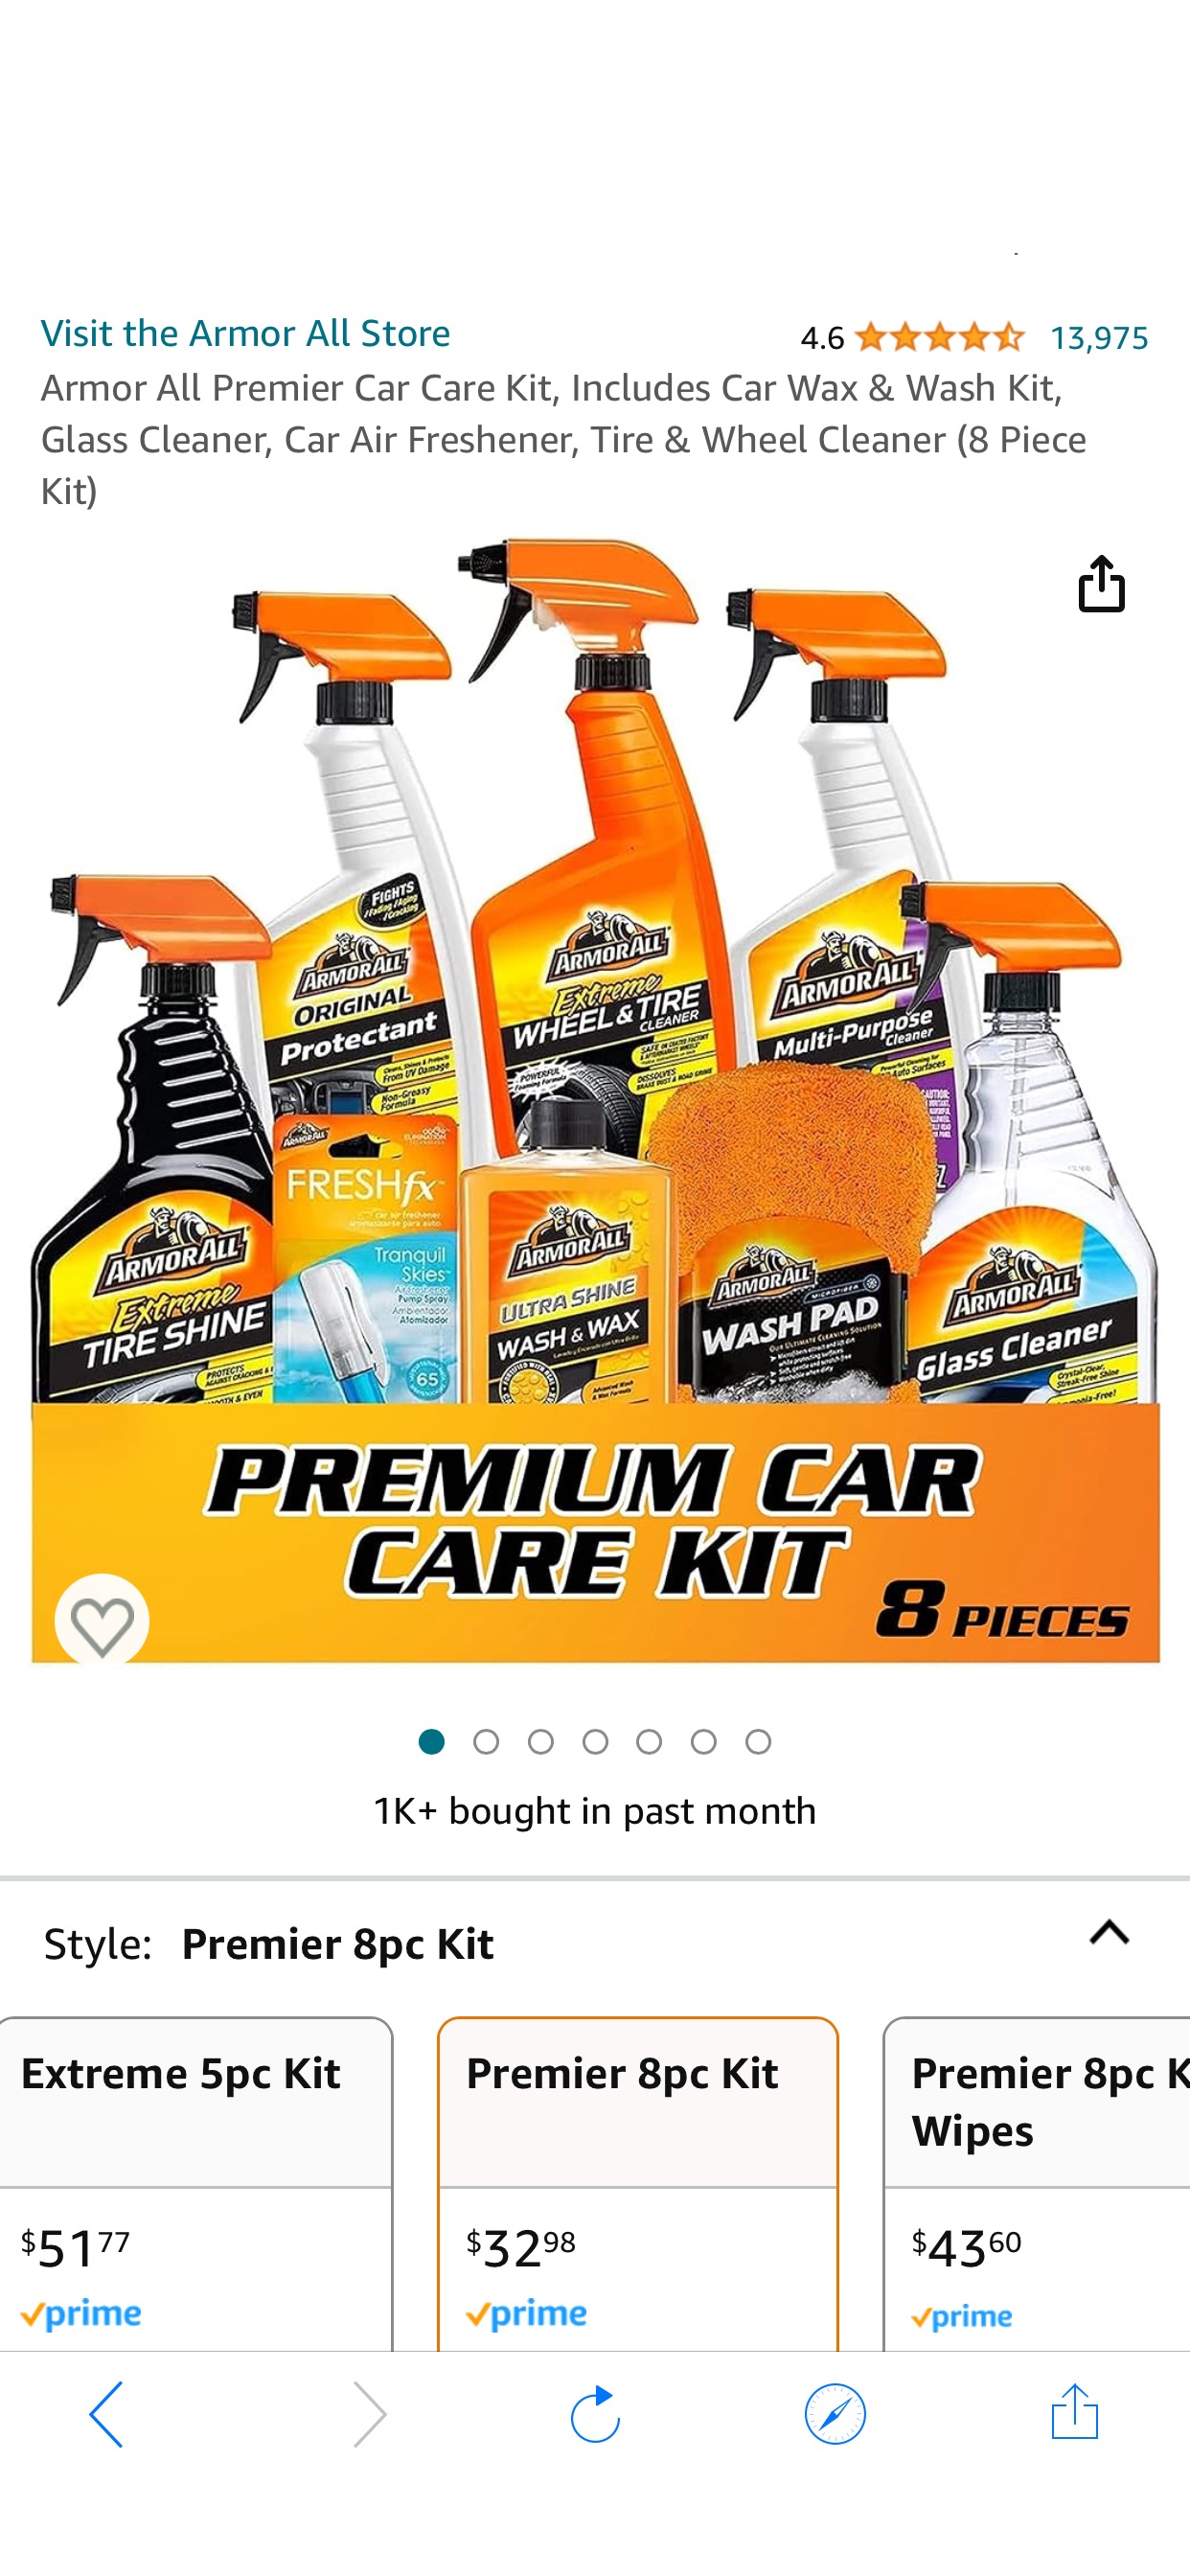 Amazon.com: Armor All Premier Car Care Kit, Includes Car Wax & Wash Kit, Glass Cleaner, Car Air Freshener, Tire & Wheel Cleaner (8 Piece Kit) : Movies & TV 汽车护理套装